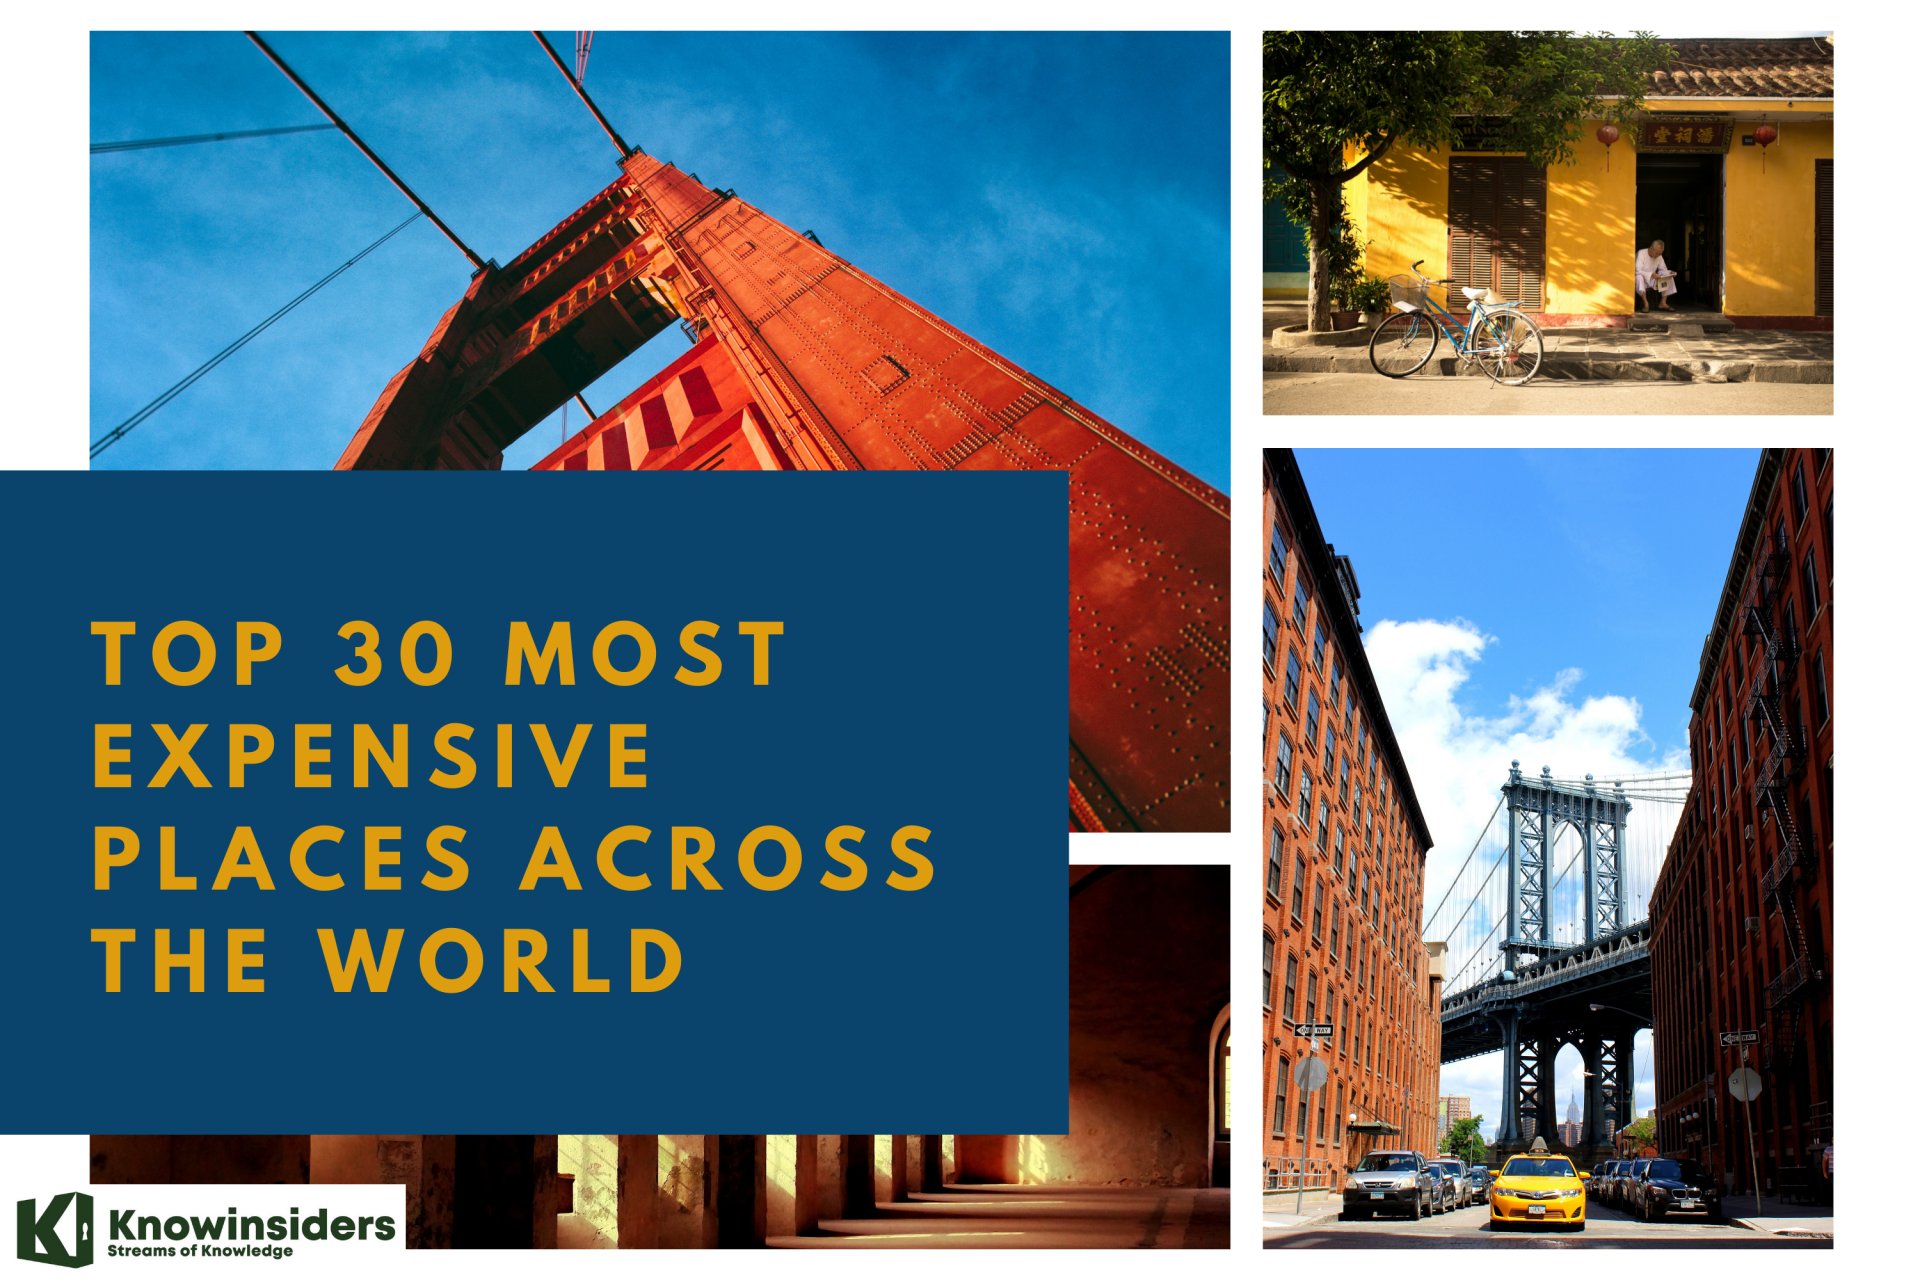 Top 30 Most Expensive Places Across the World